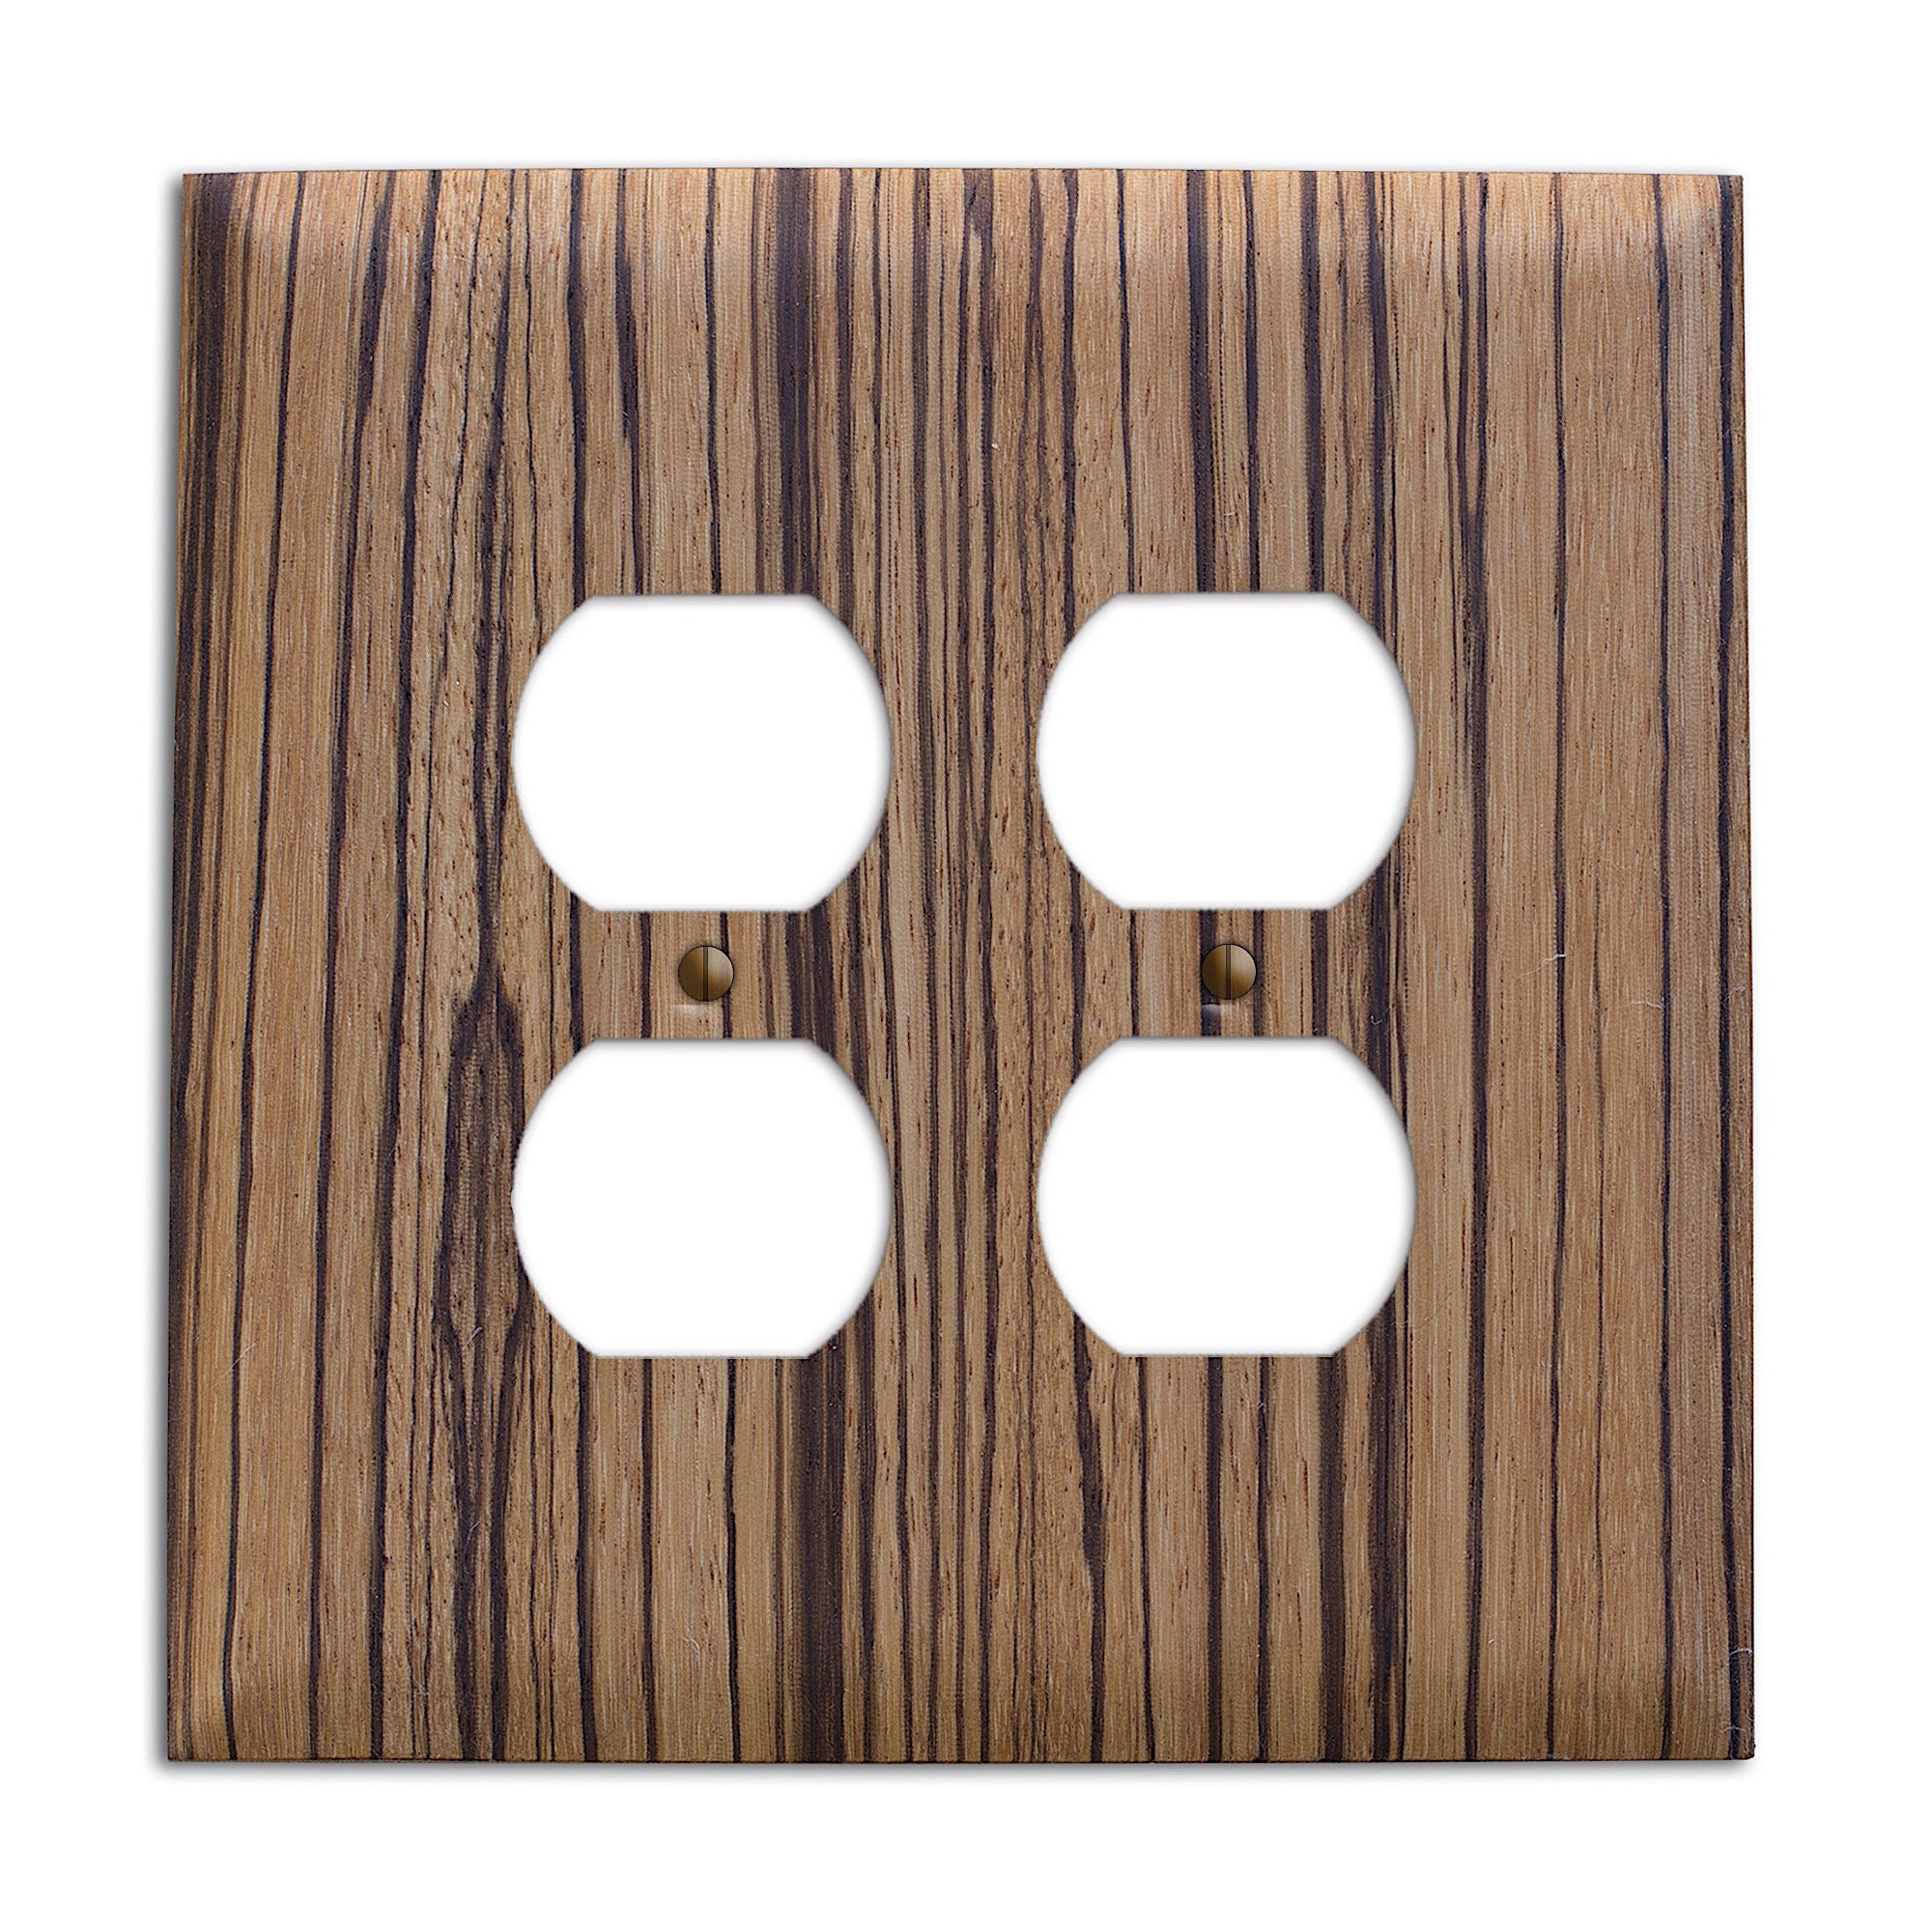 Zebrawood Switch Plate Cover, Outlet Cover, Lightswitch Cover exotic Wood  Home Décor, Toggle, Duplex, Rocker, Wallplate 